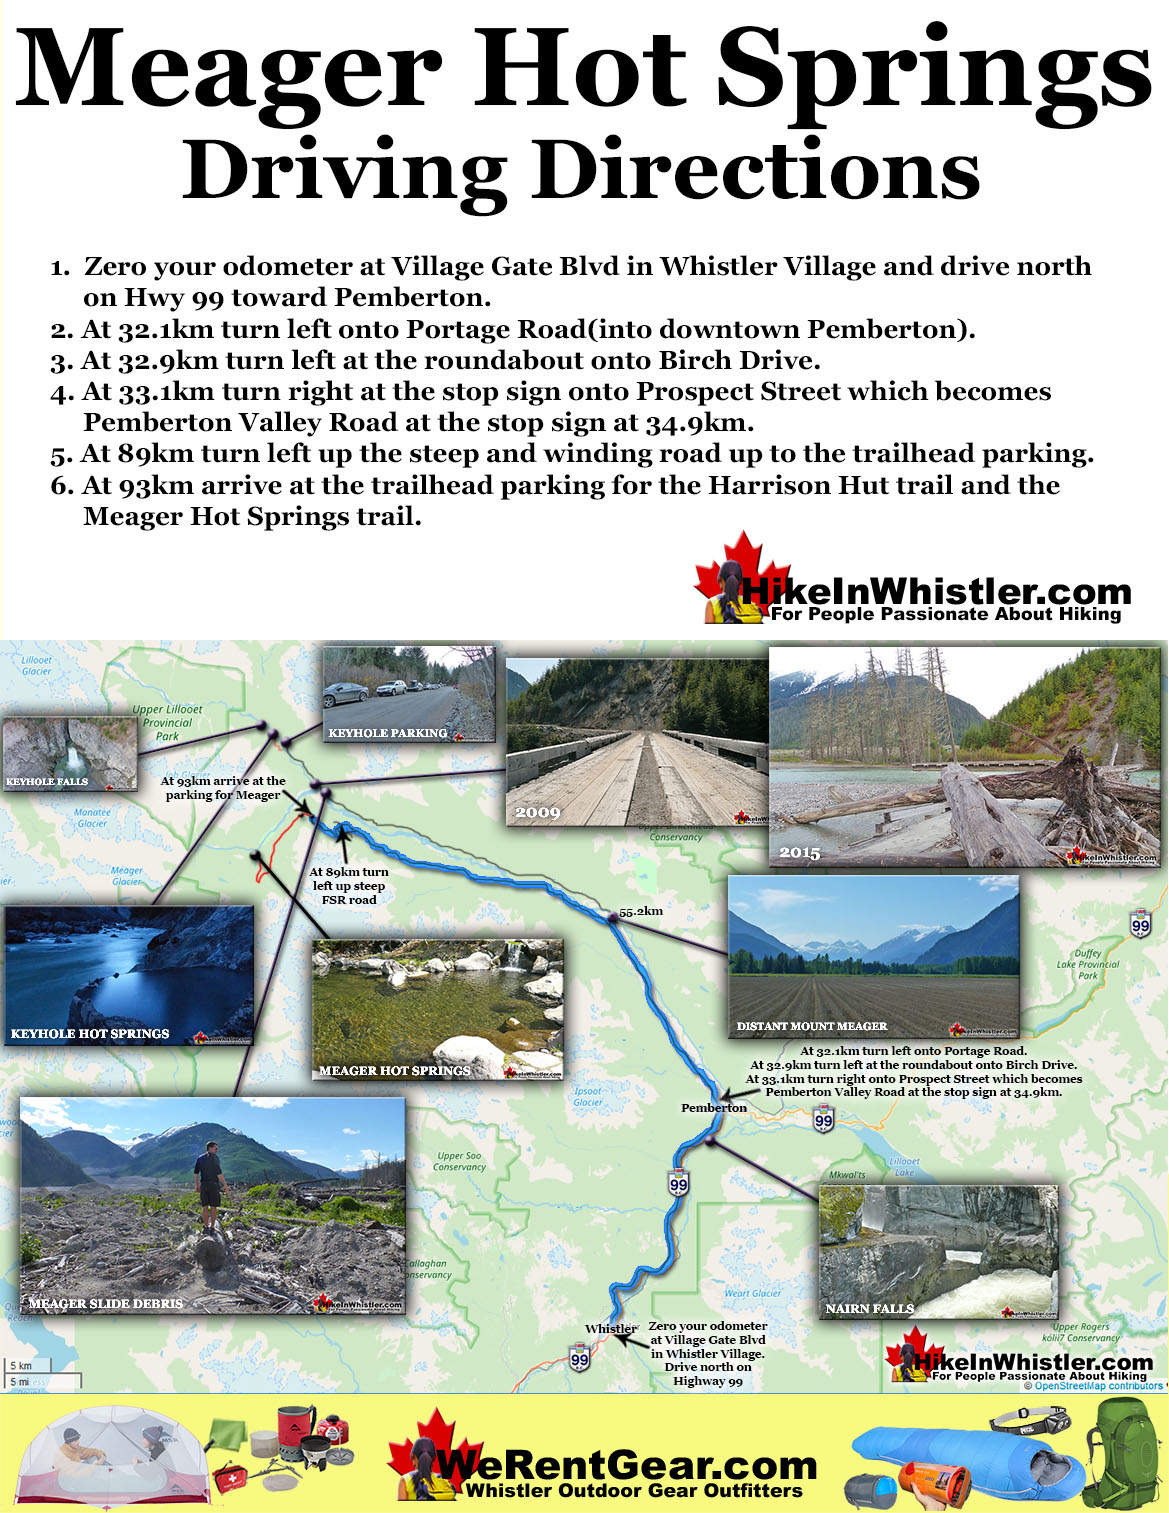 Meager Hot Springs Directions Map v2